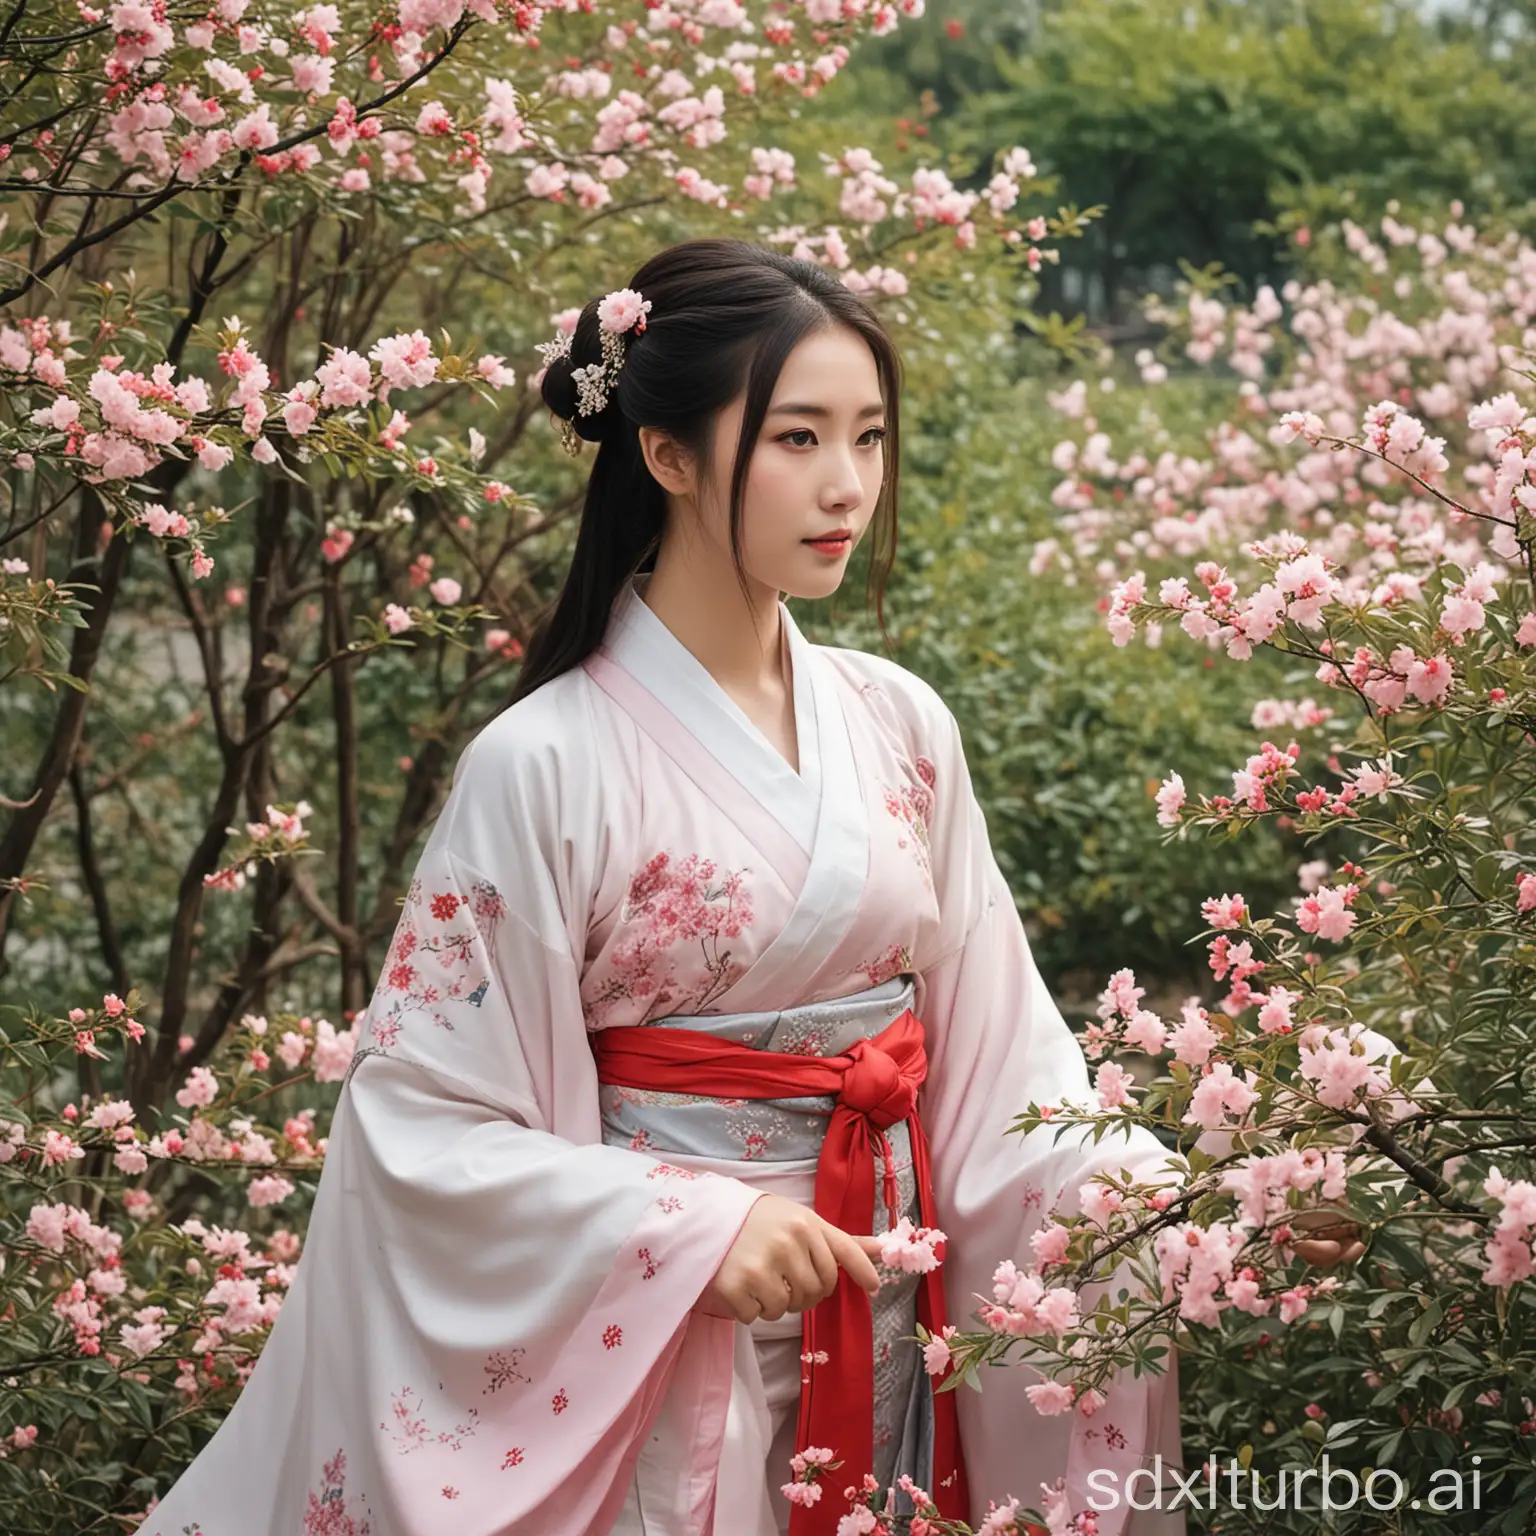 The Hanfu girl in the flower bushes.